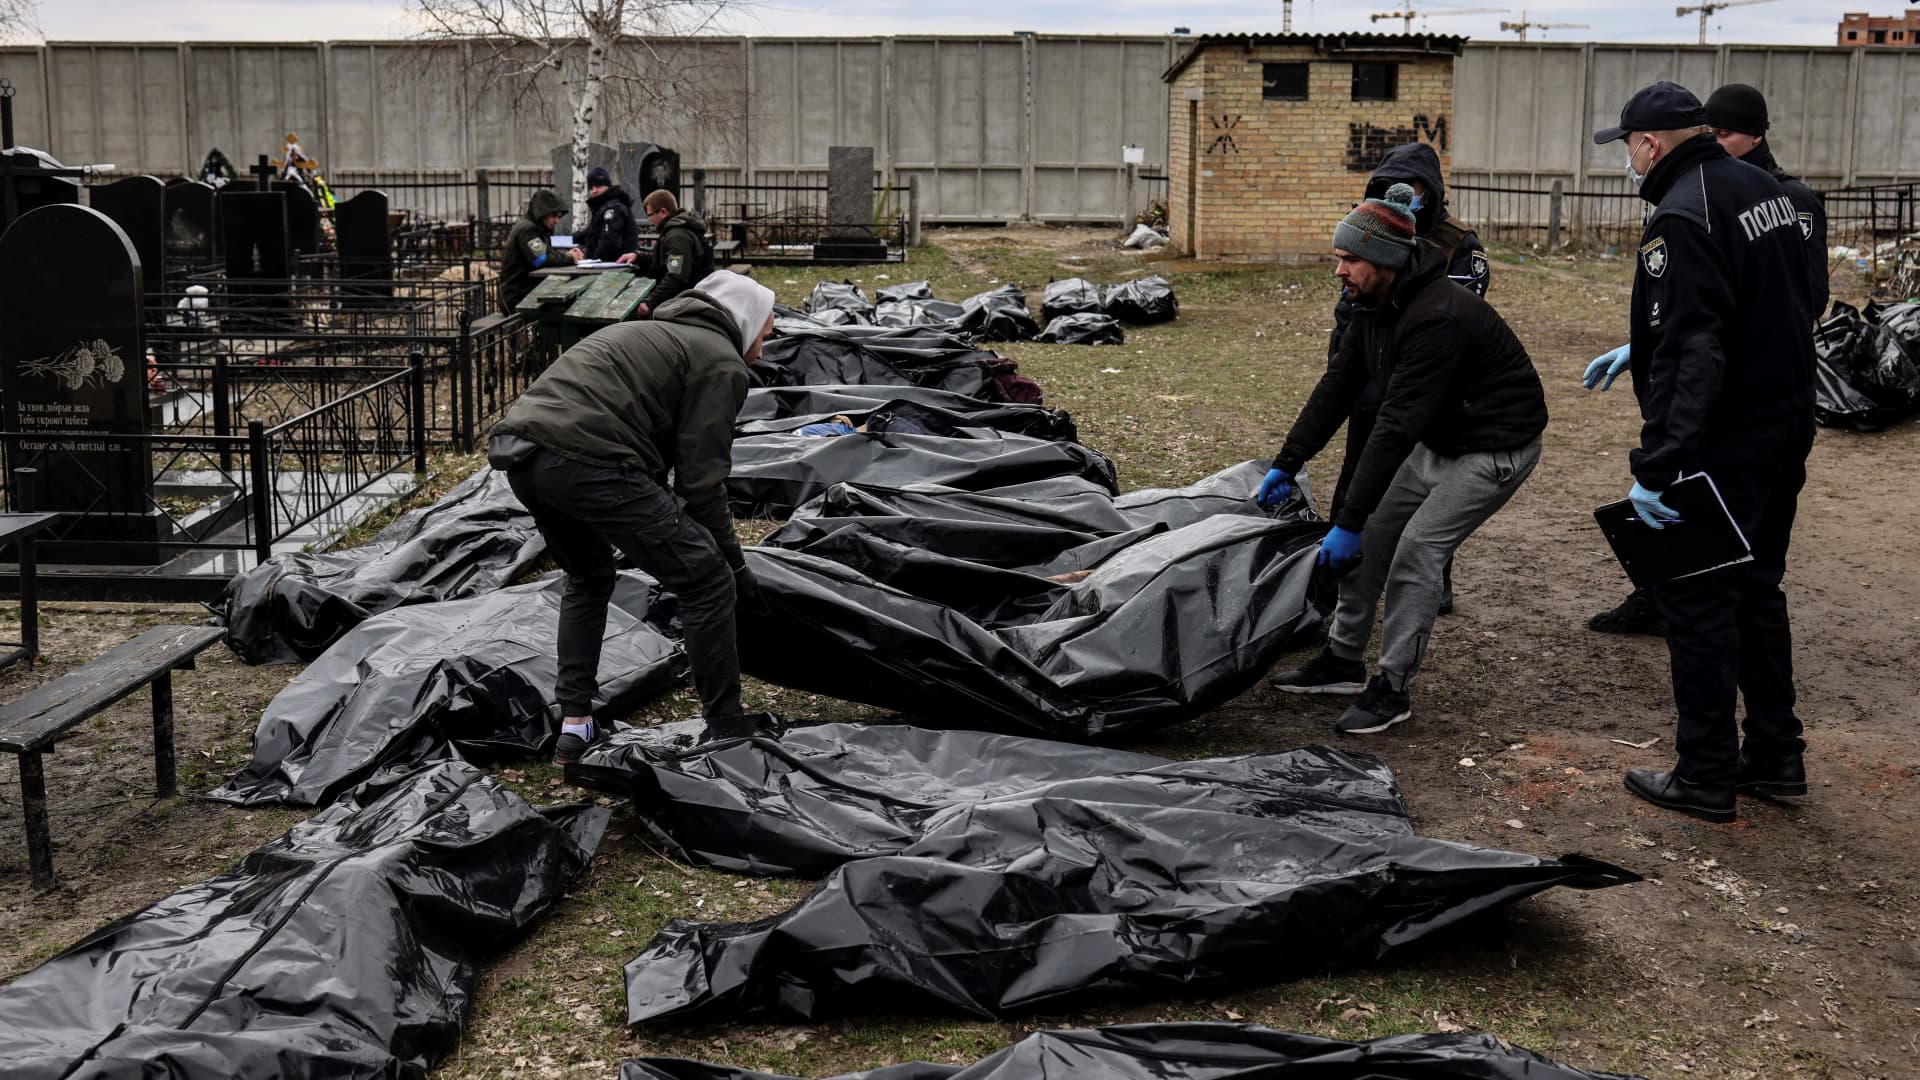 EDITORS NOTE: Graphic content / Workers line up bodies for identification by forensic personnel and police officers in the cemetery in Bucha, north of Kyiv, on April 6, 2022, after hundreds of civilians were found dead in areas from which Russian troops have withdrawn around Ukraine's capital, including the town of Bucha.